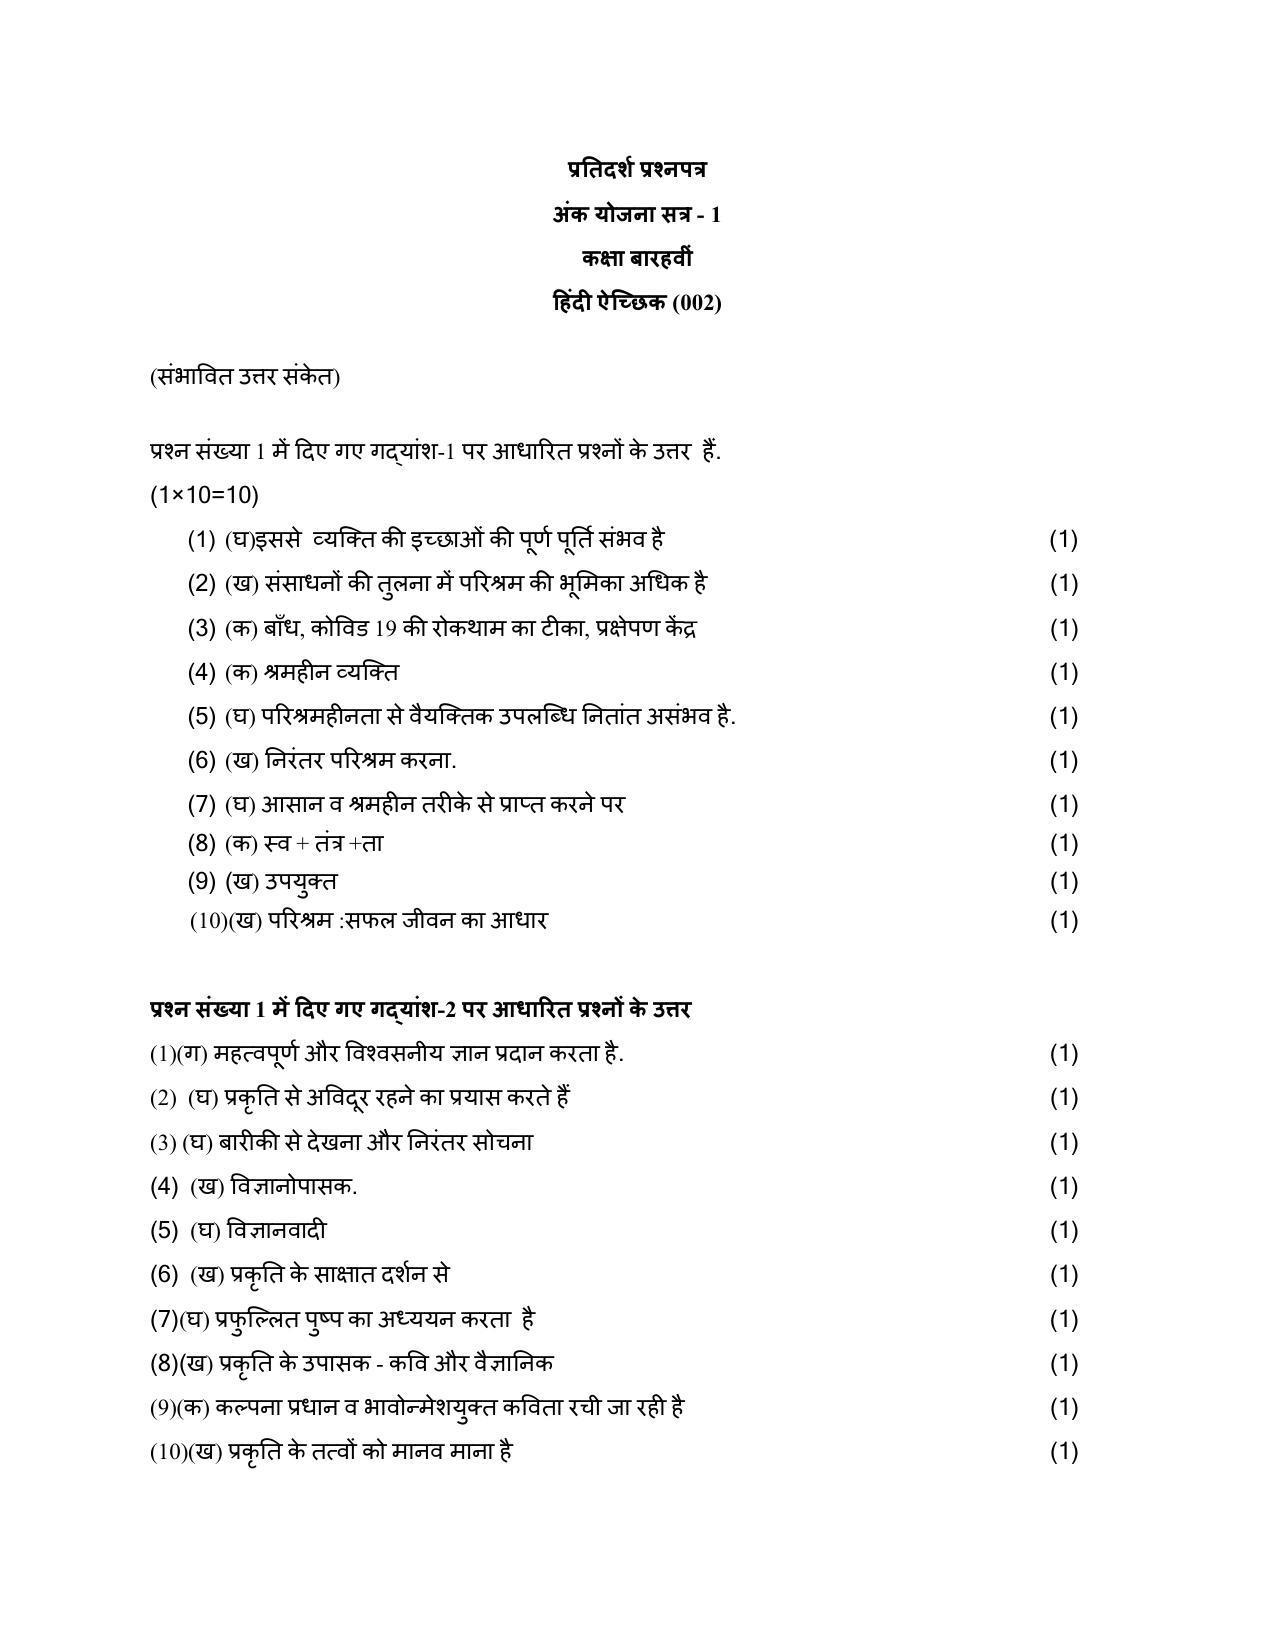 CBSE Class 12 Hindi Elective Marking Scheme and Solutions 2021-22 - Page 1